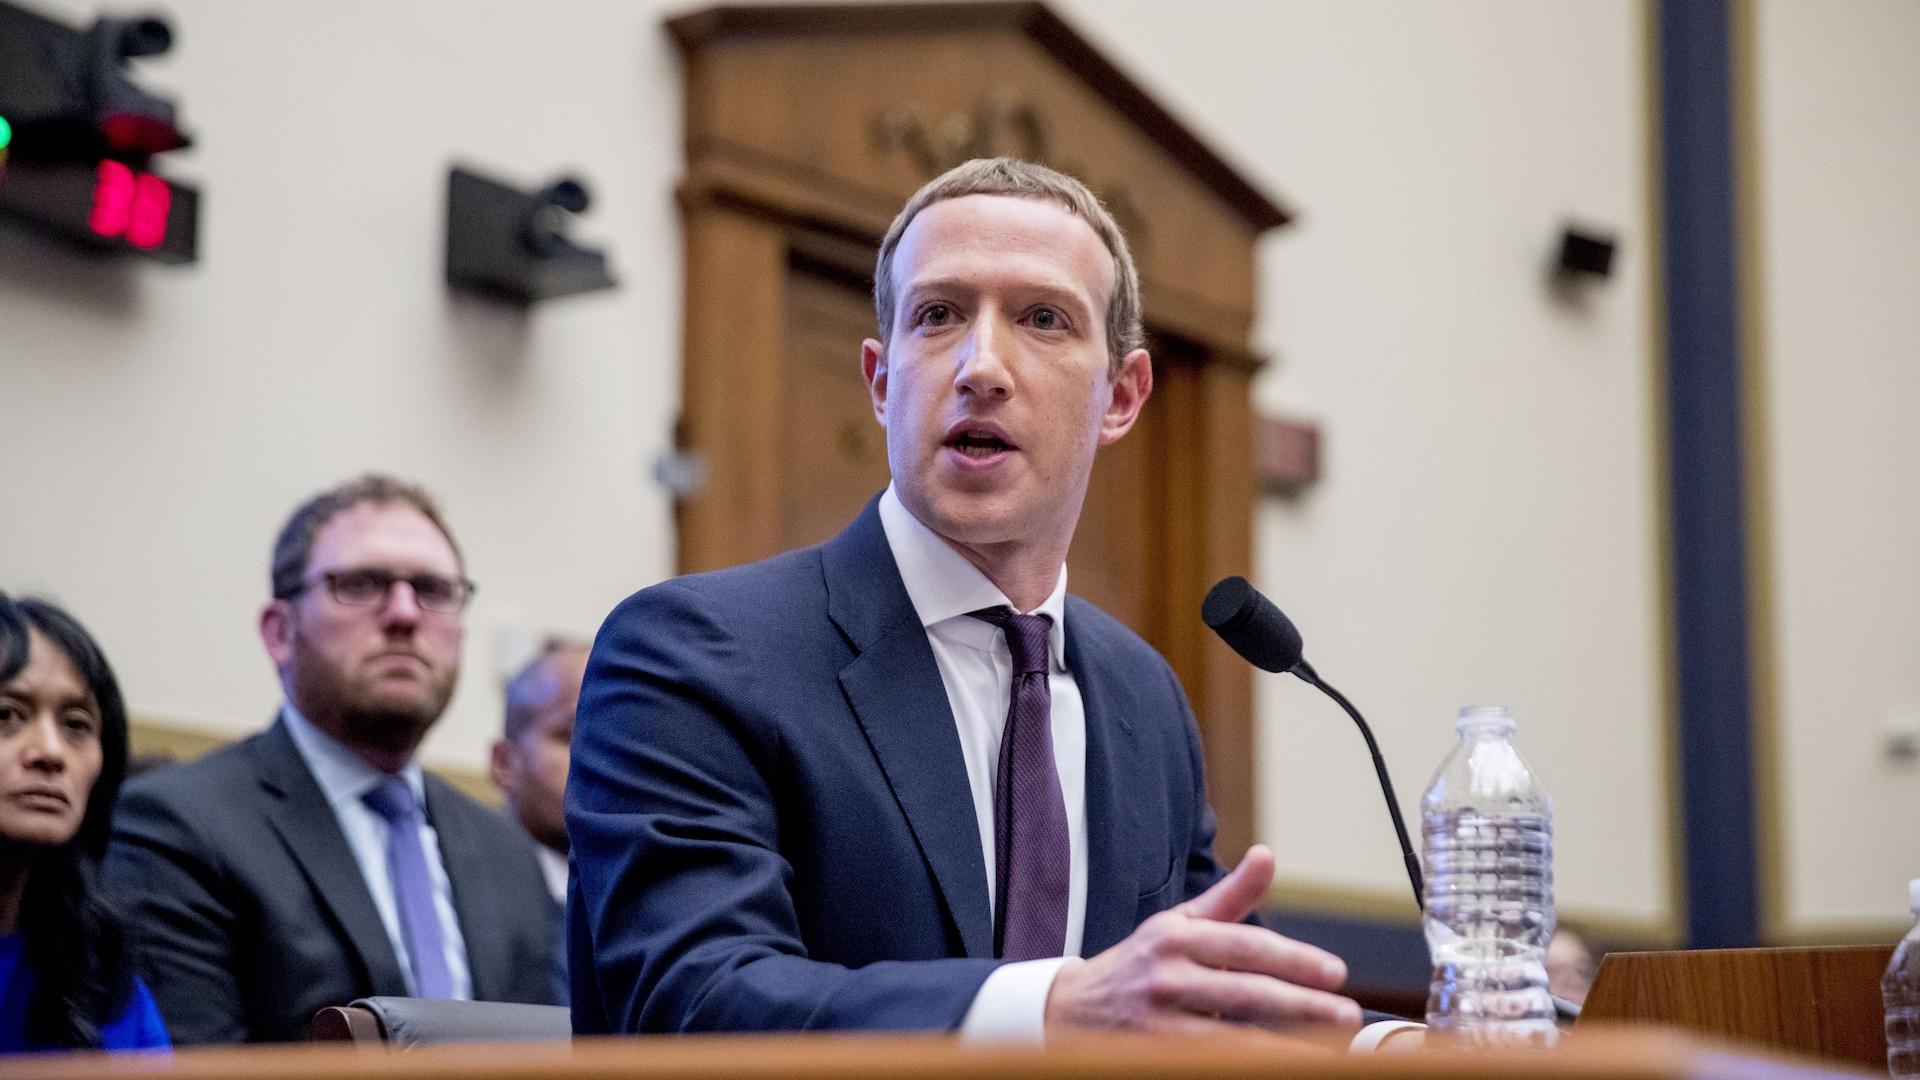 Facebook CEO Mark Zuckerberg testifies before a House Financial Services Committee hearing on Capitol Hill in Washington, Oct. 23, 2019. (AP Photo/Andrew Harnik)